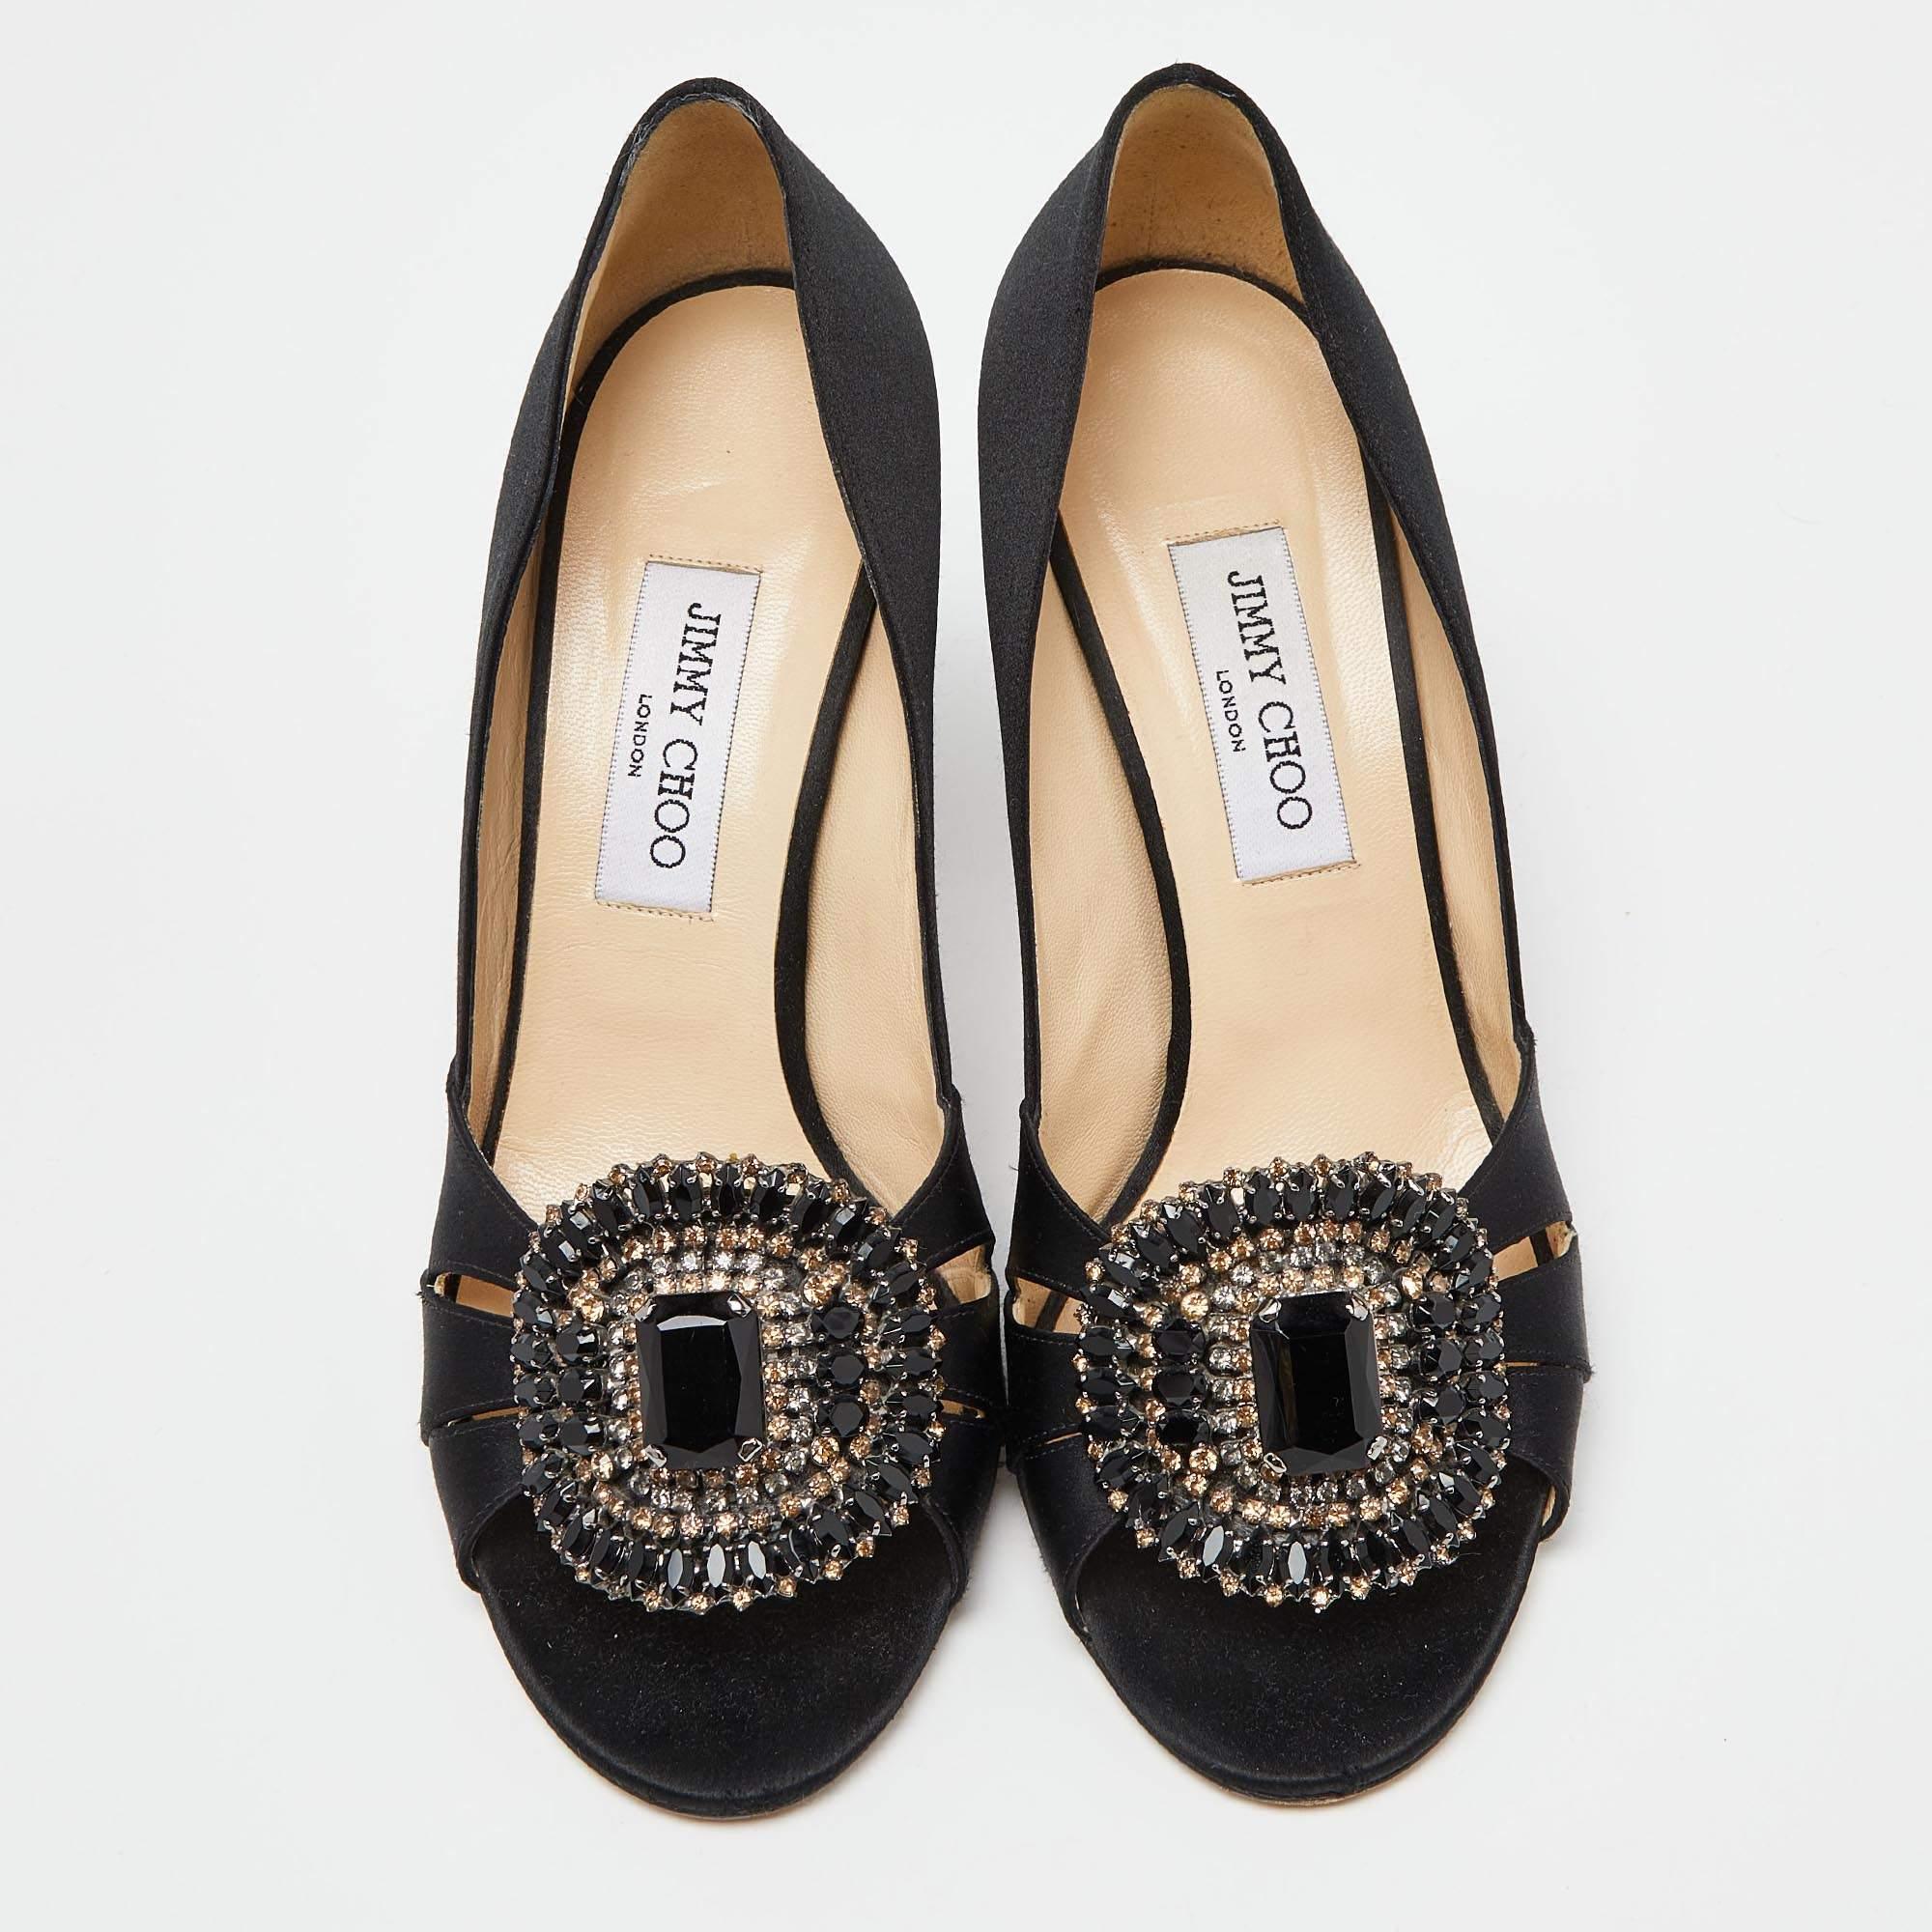 These chic and classic Jimmy Choo peep-toe pumps can be worn to evening parties as well as dinner outings. The pair is crafted with soft satin in a black hue. They come with embellishments and cutouts on the vamps, and 9.5cm high heels.

